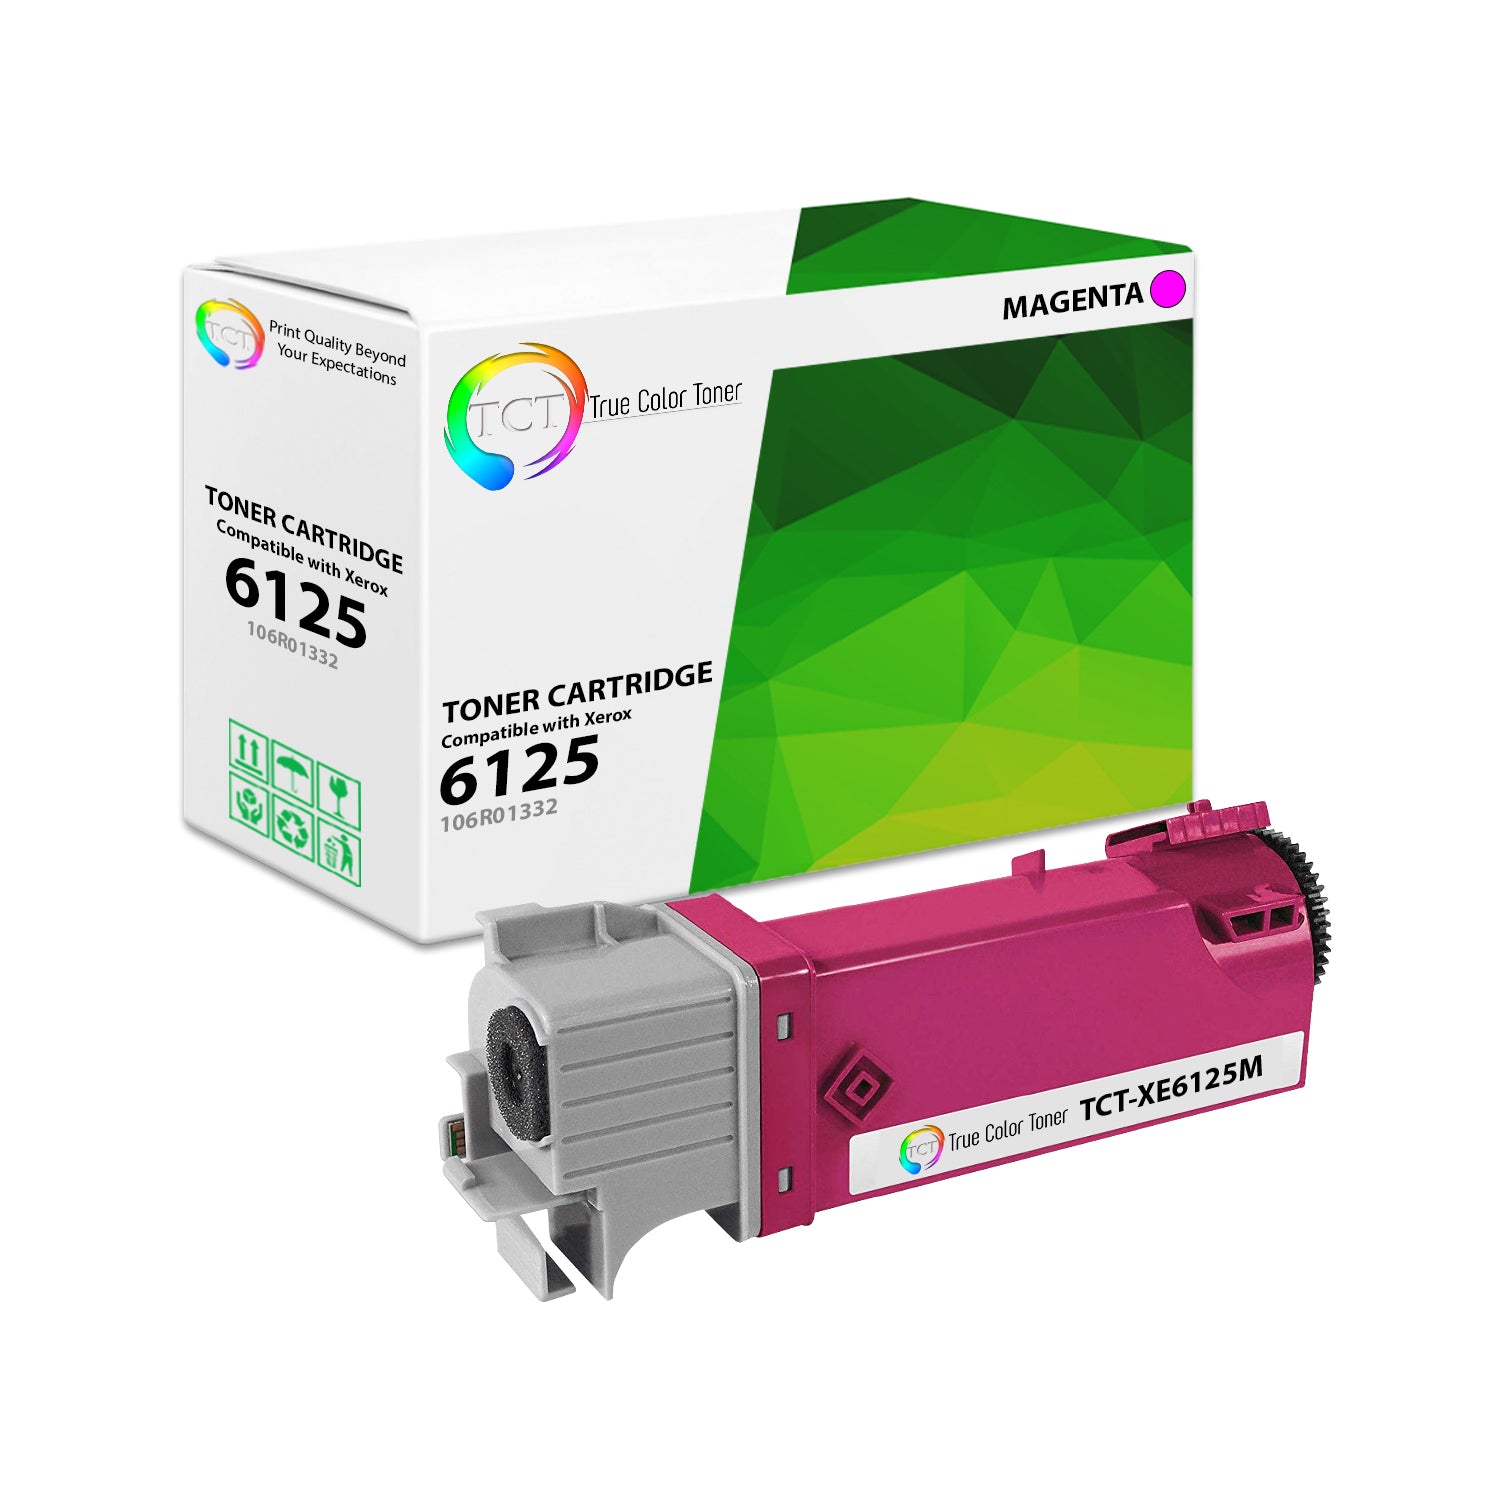 TCT Compatible Toner Cartridge Replacement for the Xerox 6125 Series - 1 Pack Magenta